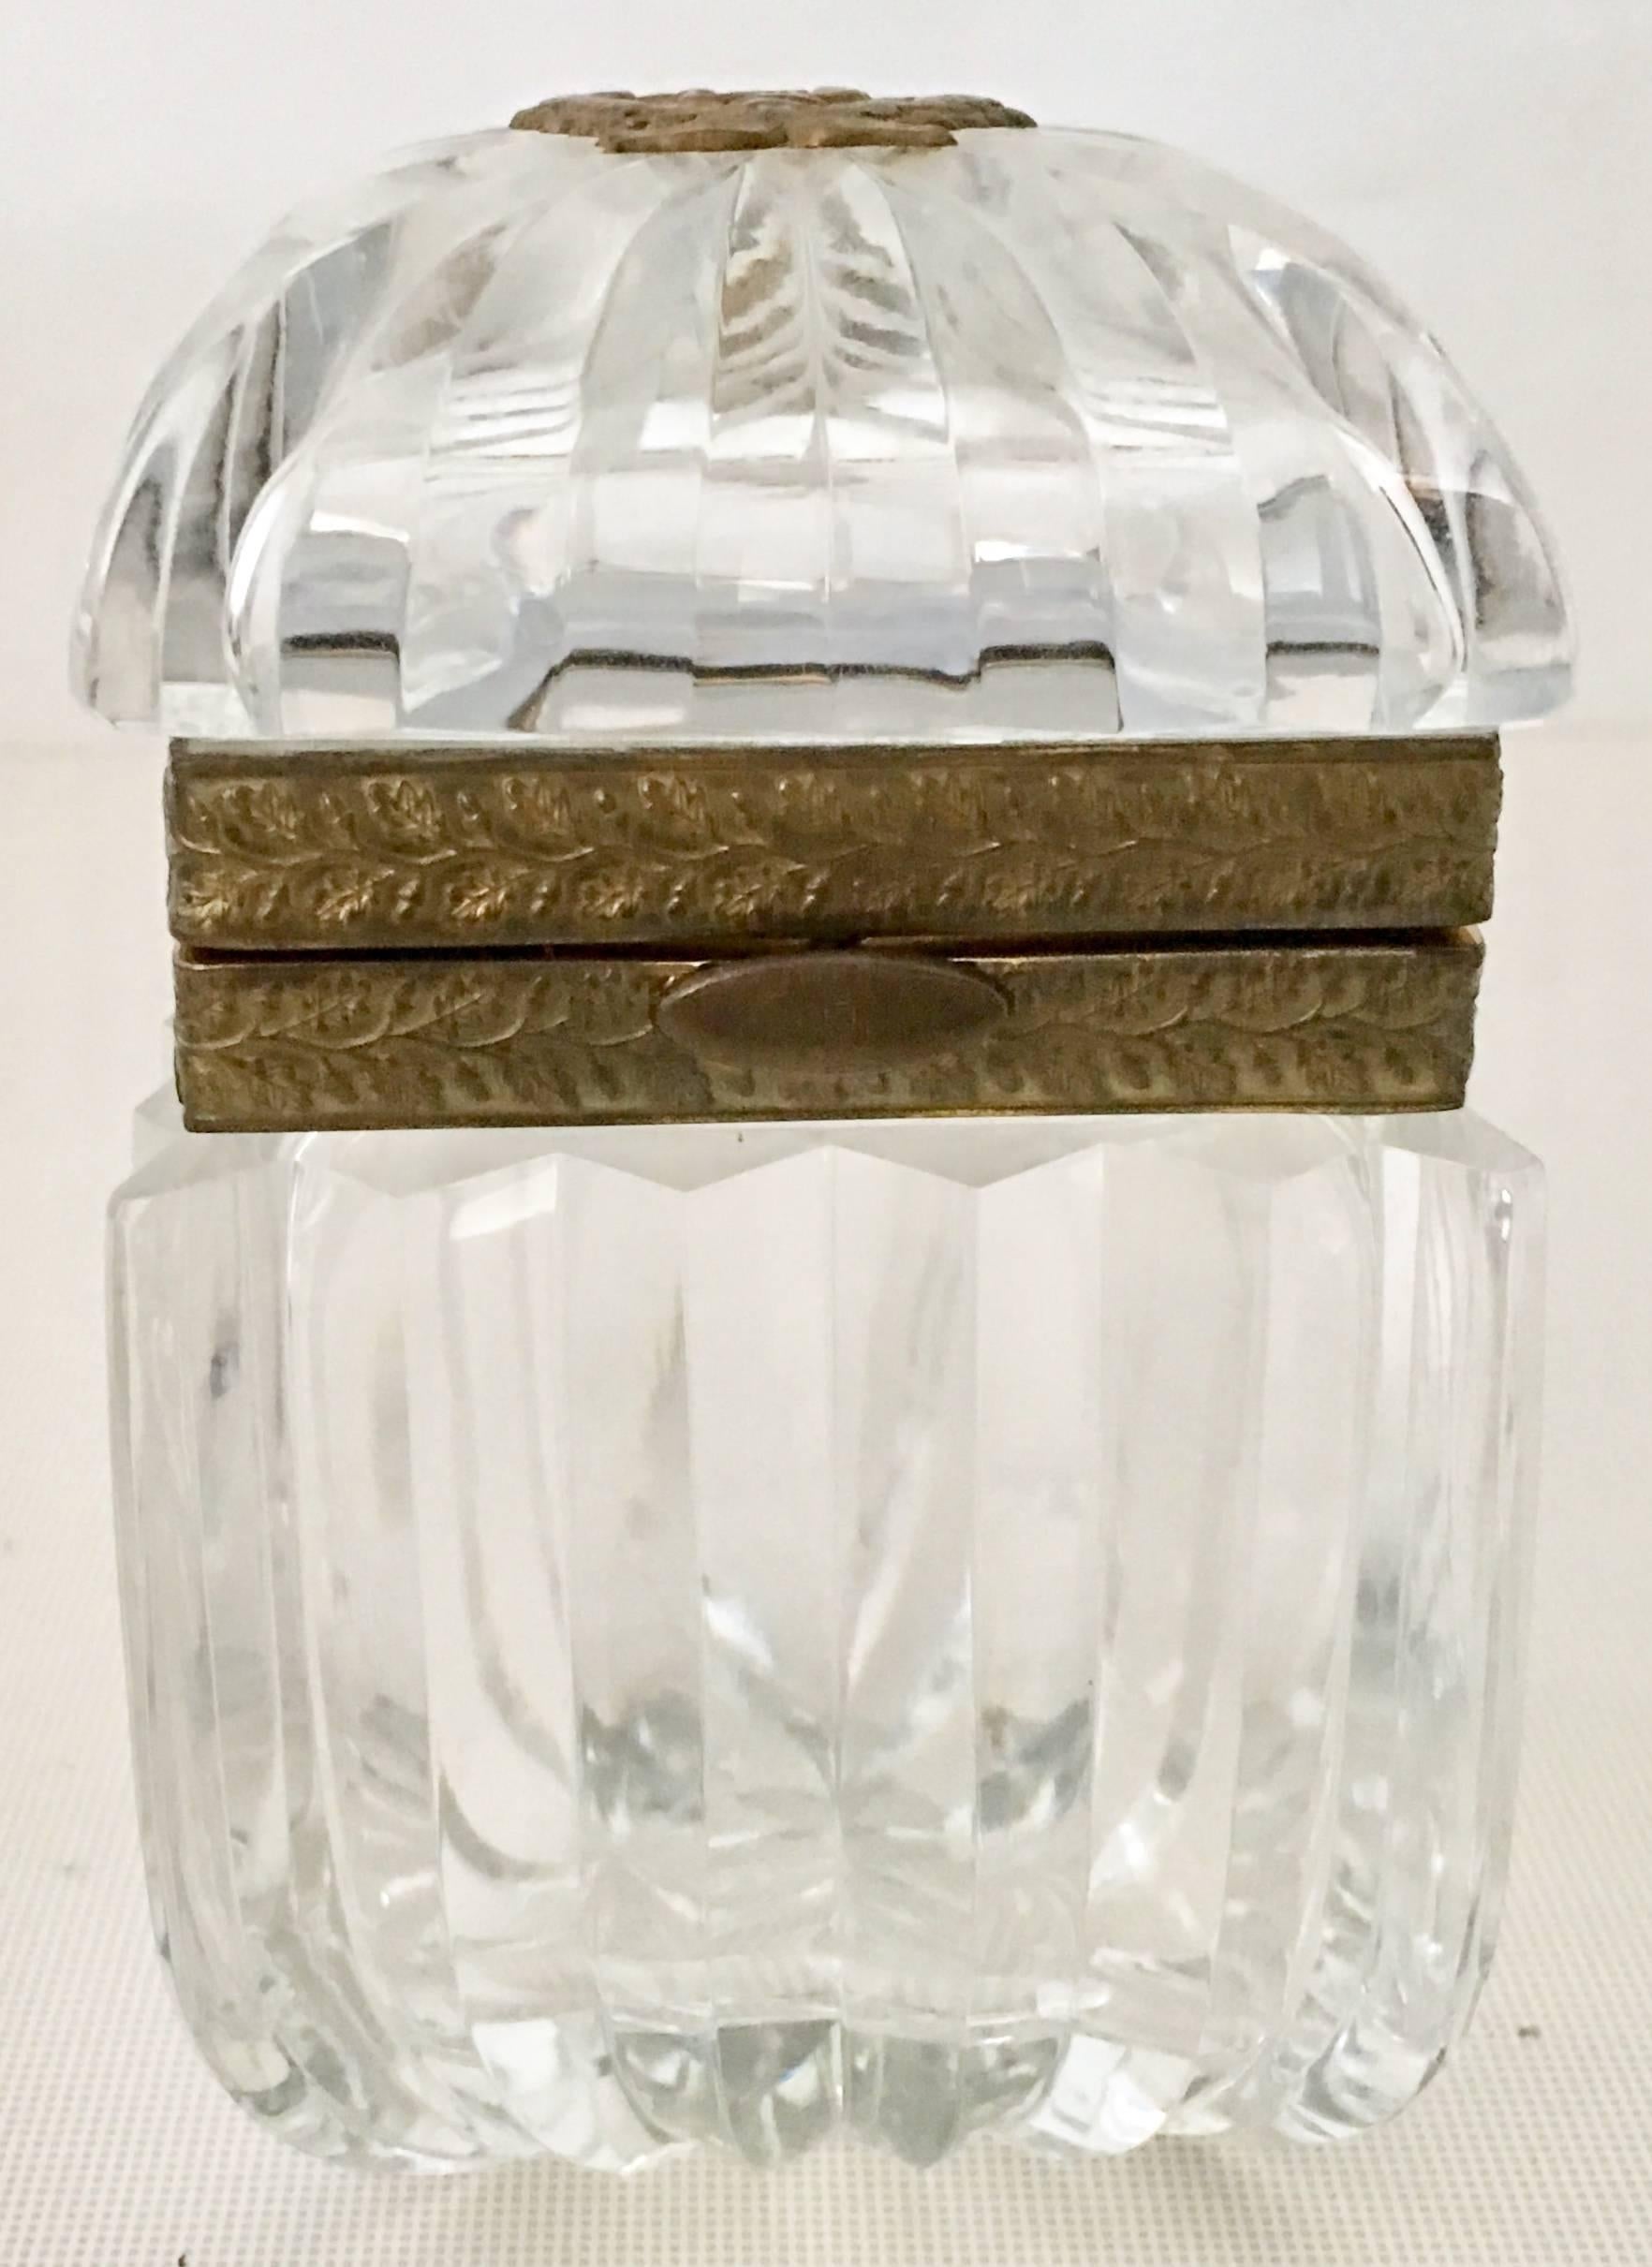 Early 20th Century French Cut Crystal & Bronze Ormolu Lyric Crest Hinge Casket Box. Features a modern cut
crystal body, bronze ormolu locking and hinge detail. The top of the box is 